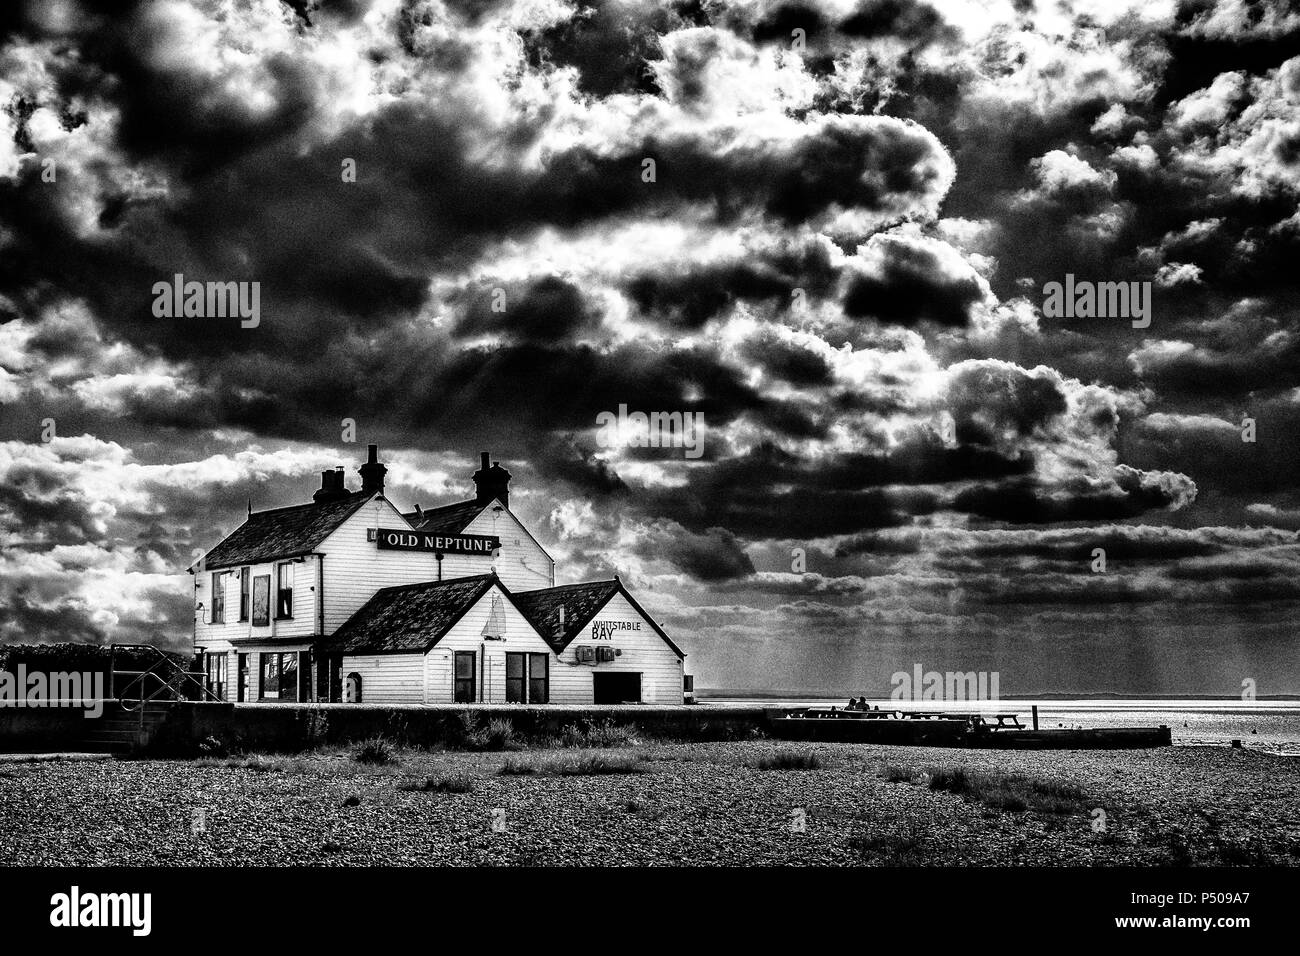 Le vieux Neptune,Pub,plage,Whitstable Whitstable Kent,UK,Angleterre, Banque D'Images